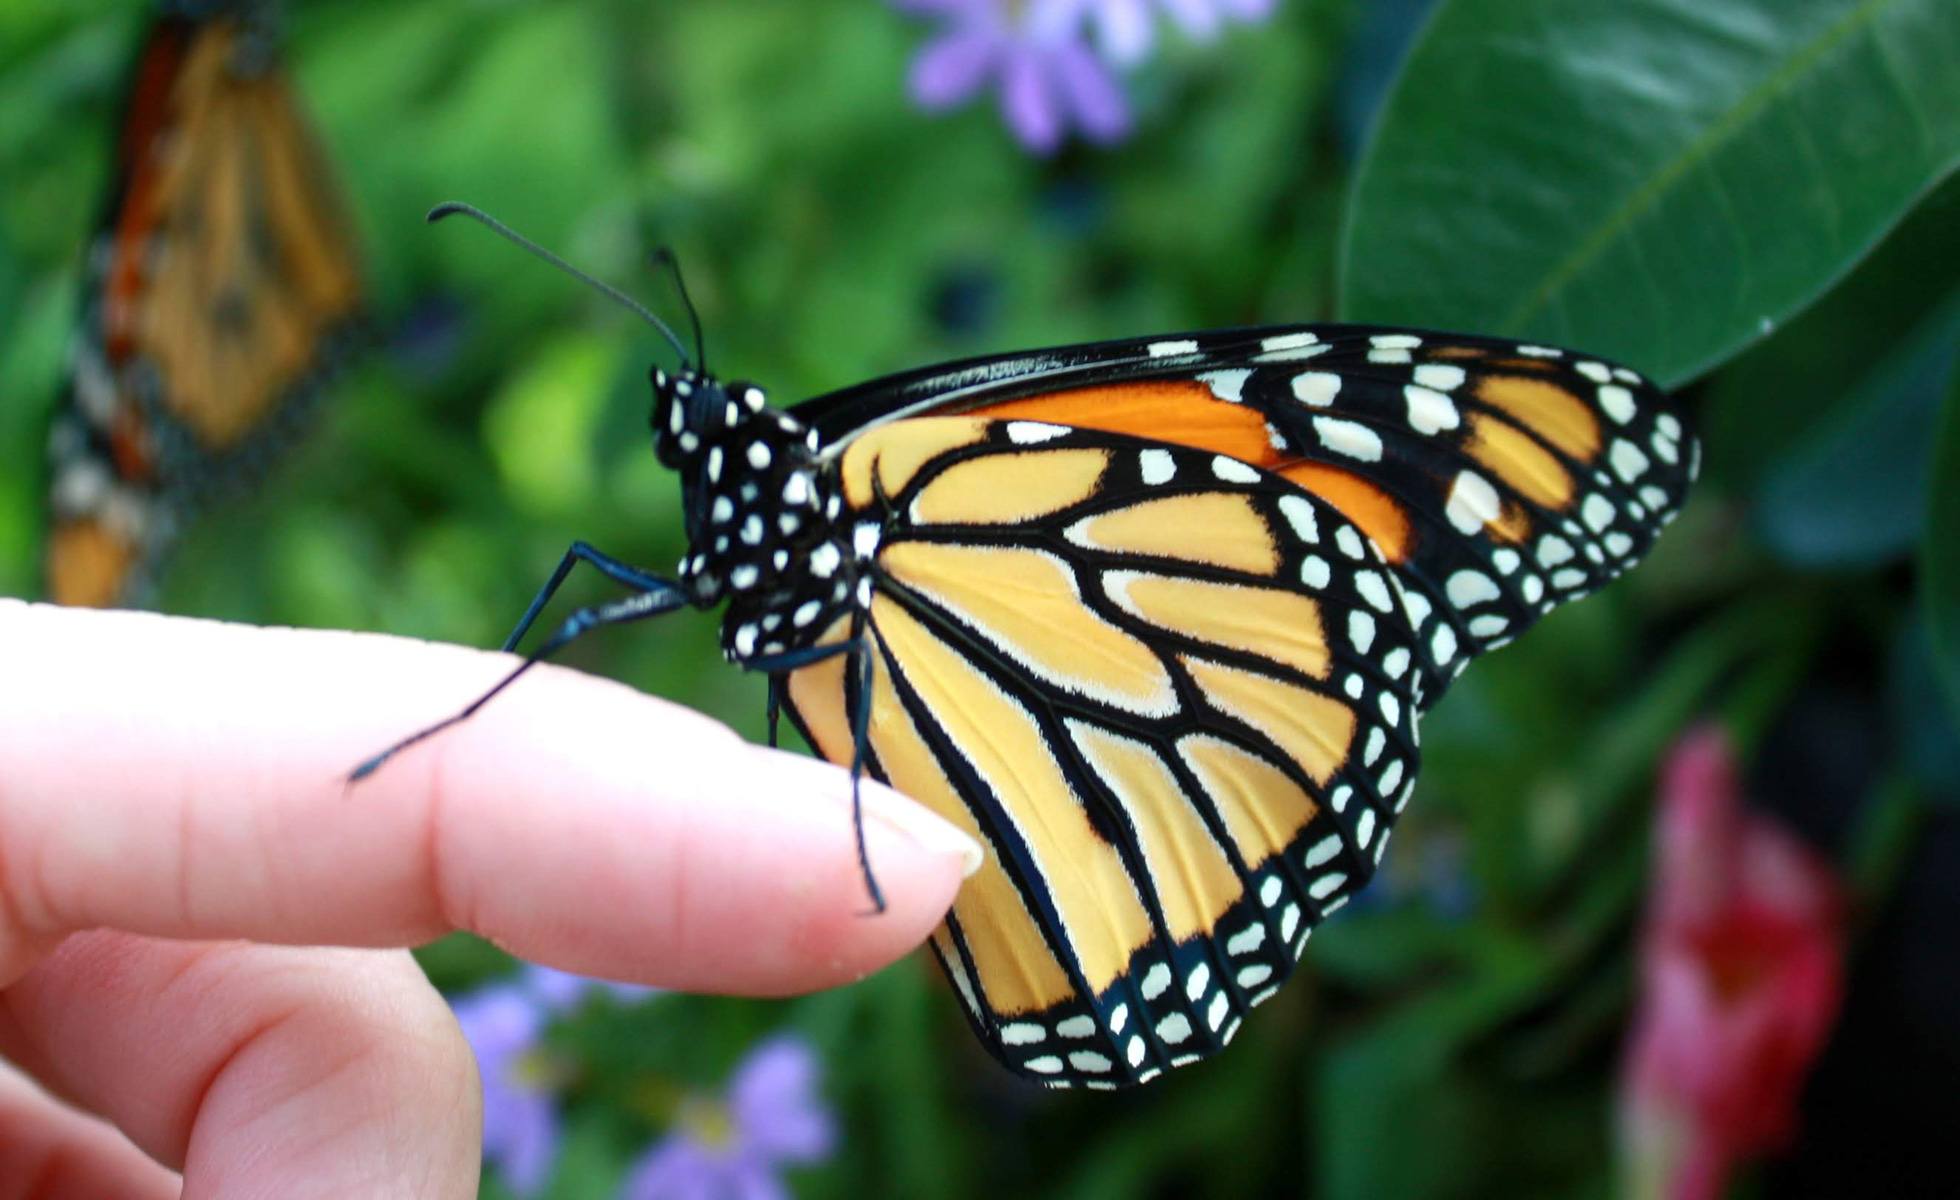 A monach butterfly perched on a person's finger